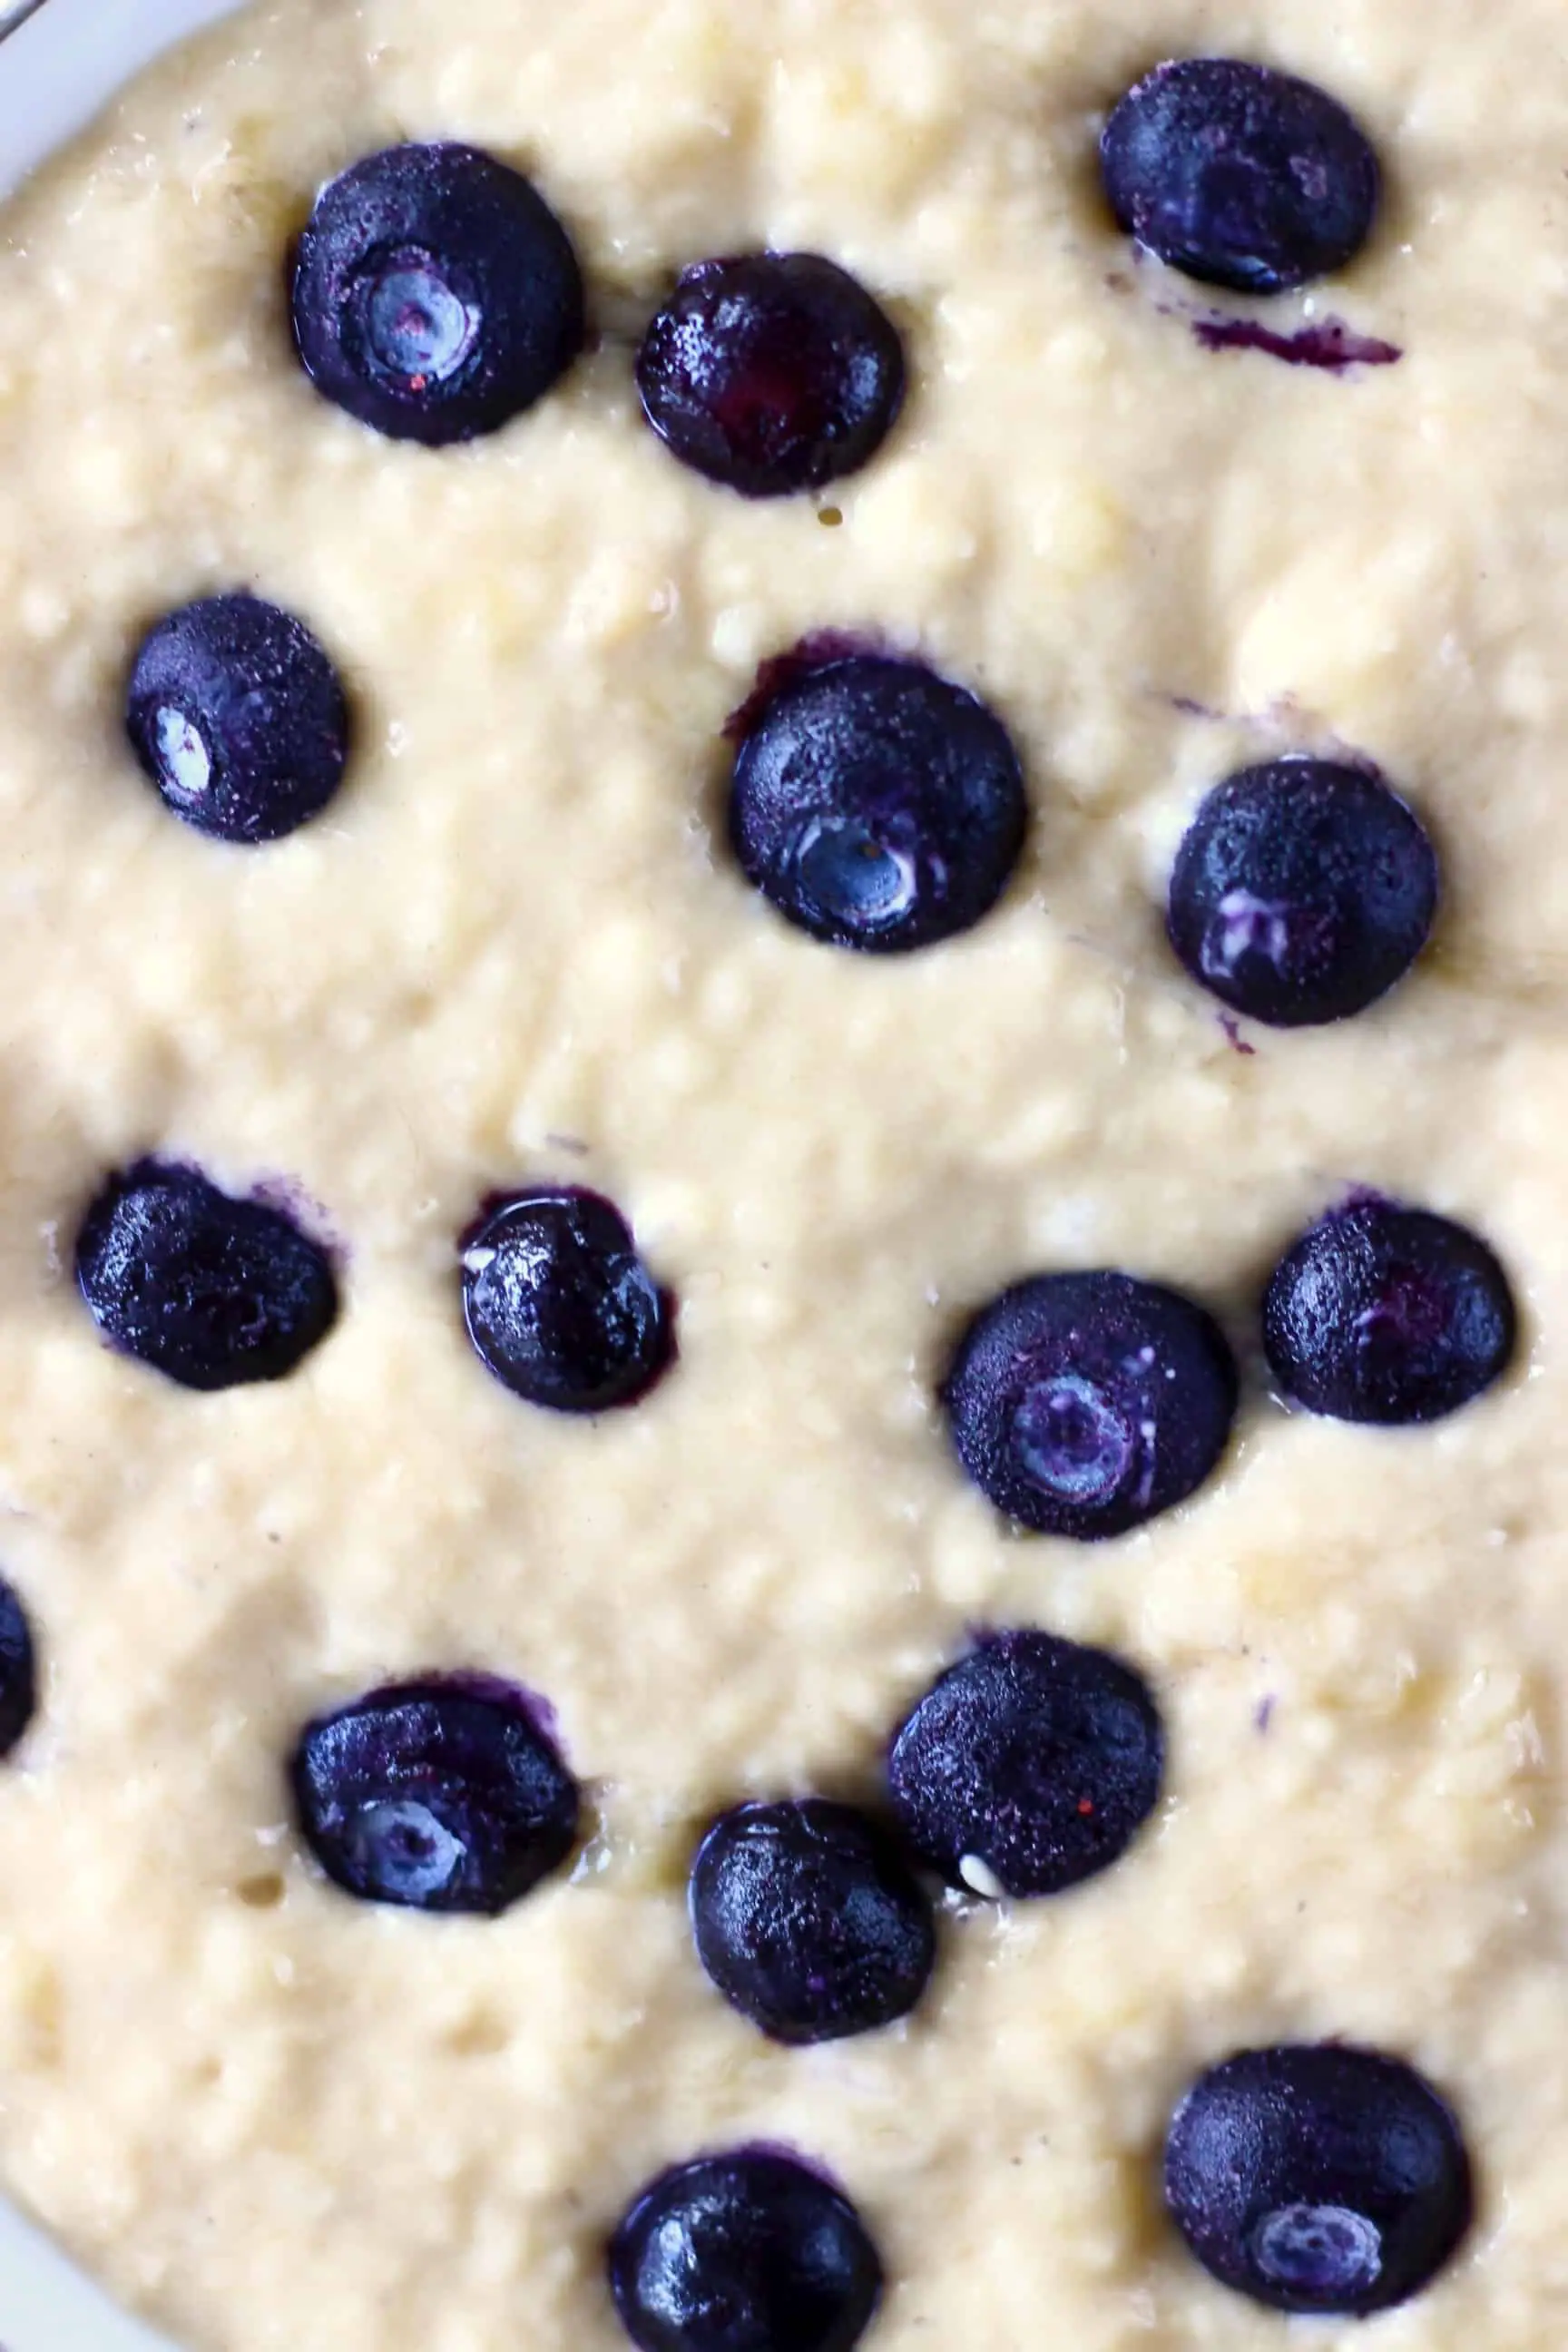 Gluten-free vegan banana bread batter with blueberries in a bowl